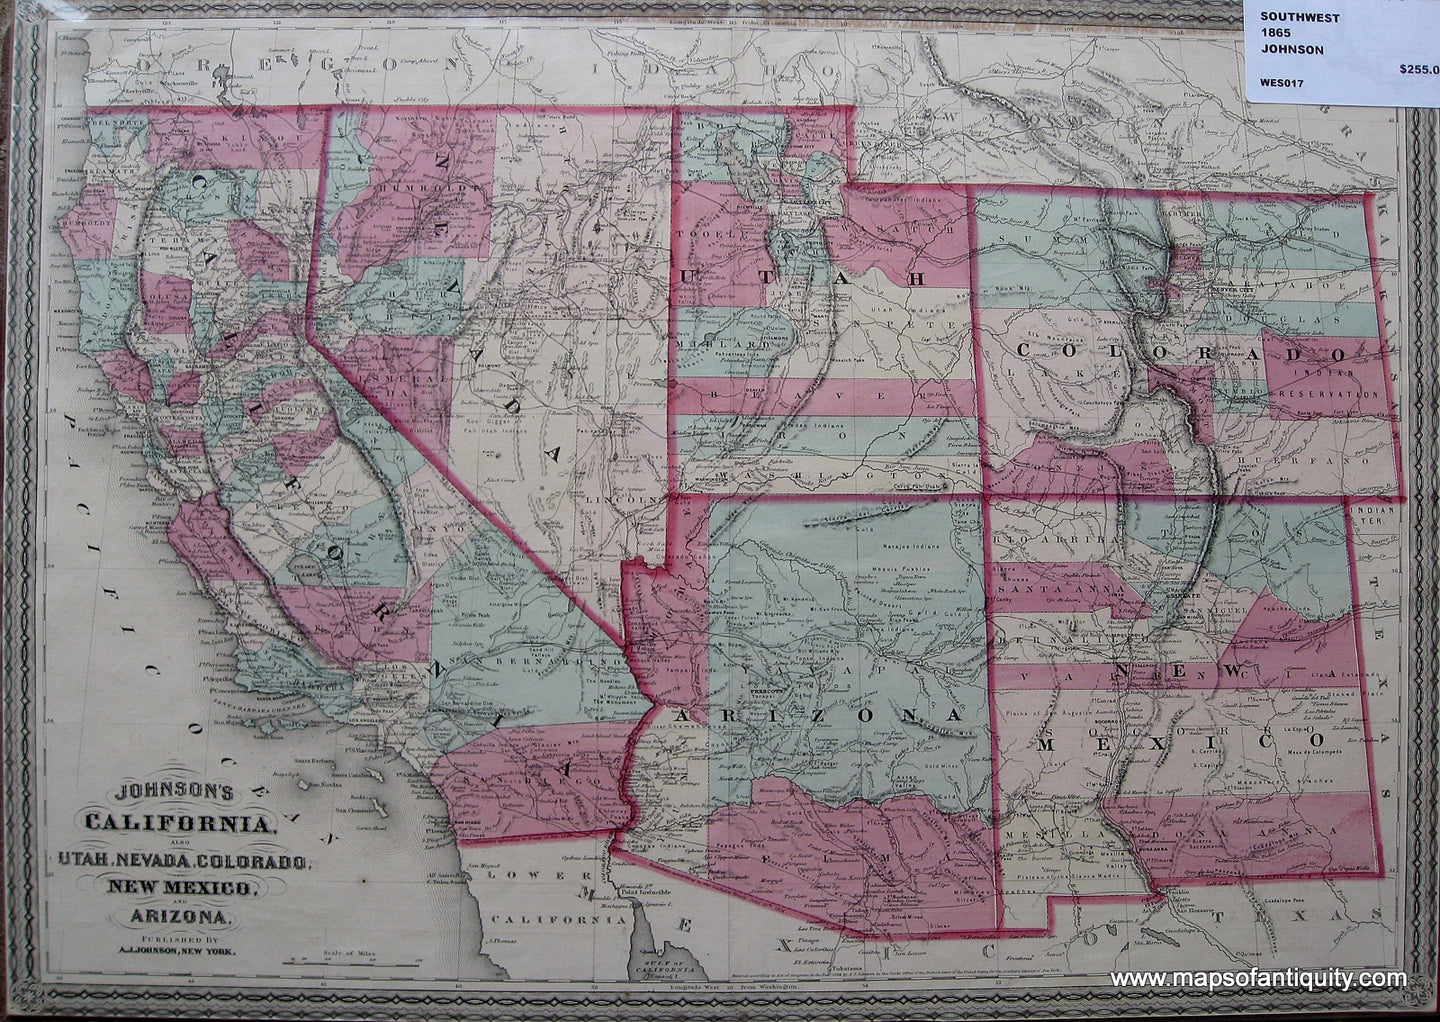 Antique-Hand-Colored-Map-Johnson's-California-also-Utah-Nevada-Colorado-New-Mexico-and-Arizona-United-States-West-1870-Johnson-Maps-Of-Antiquity